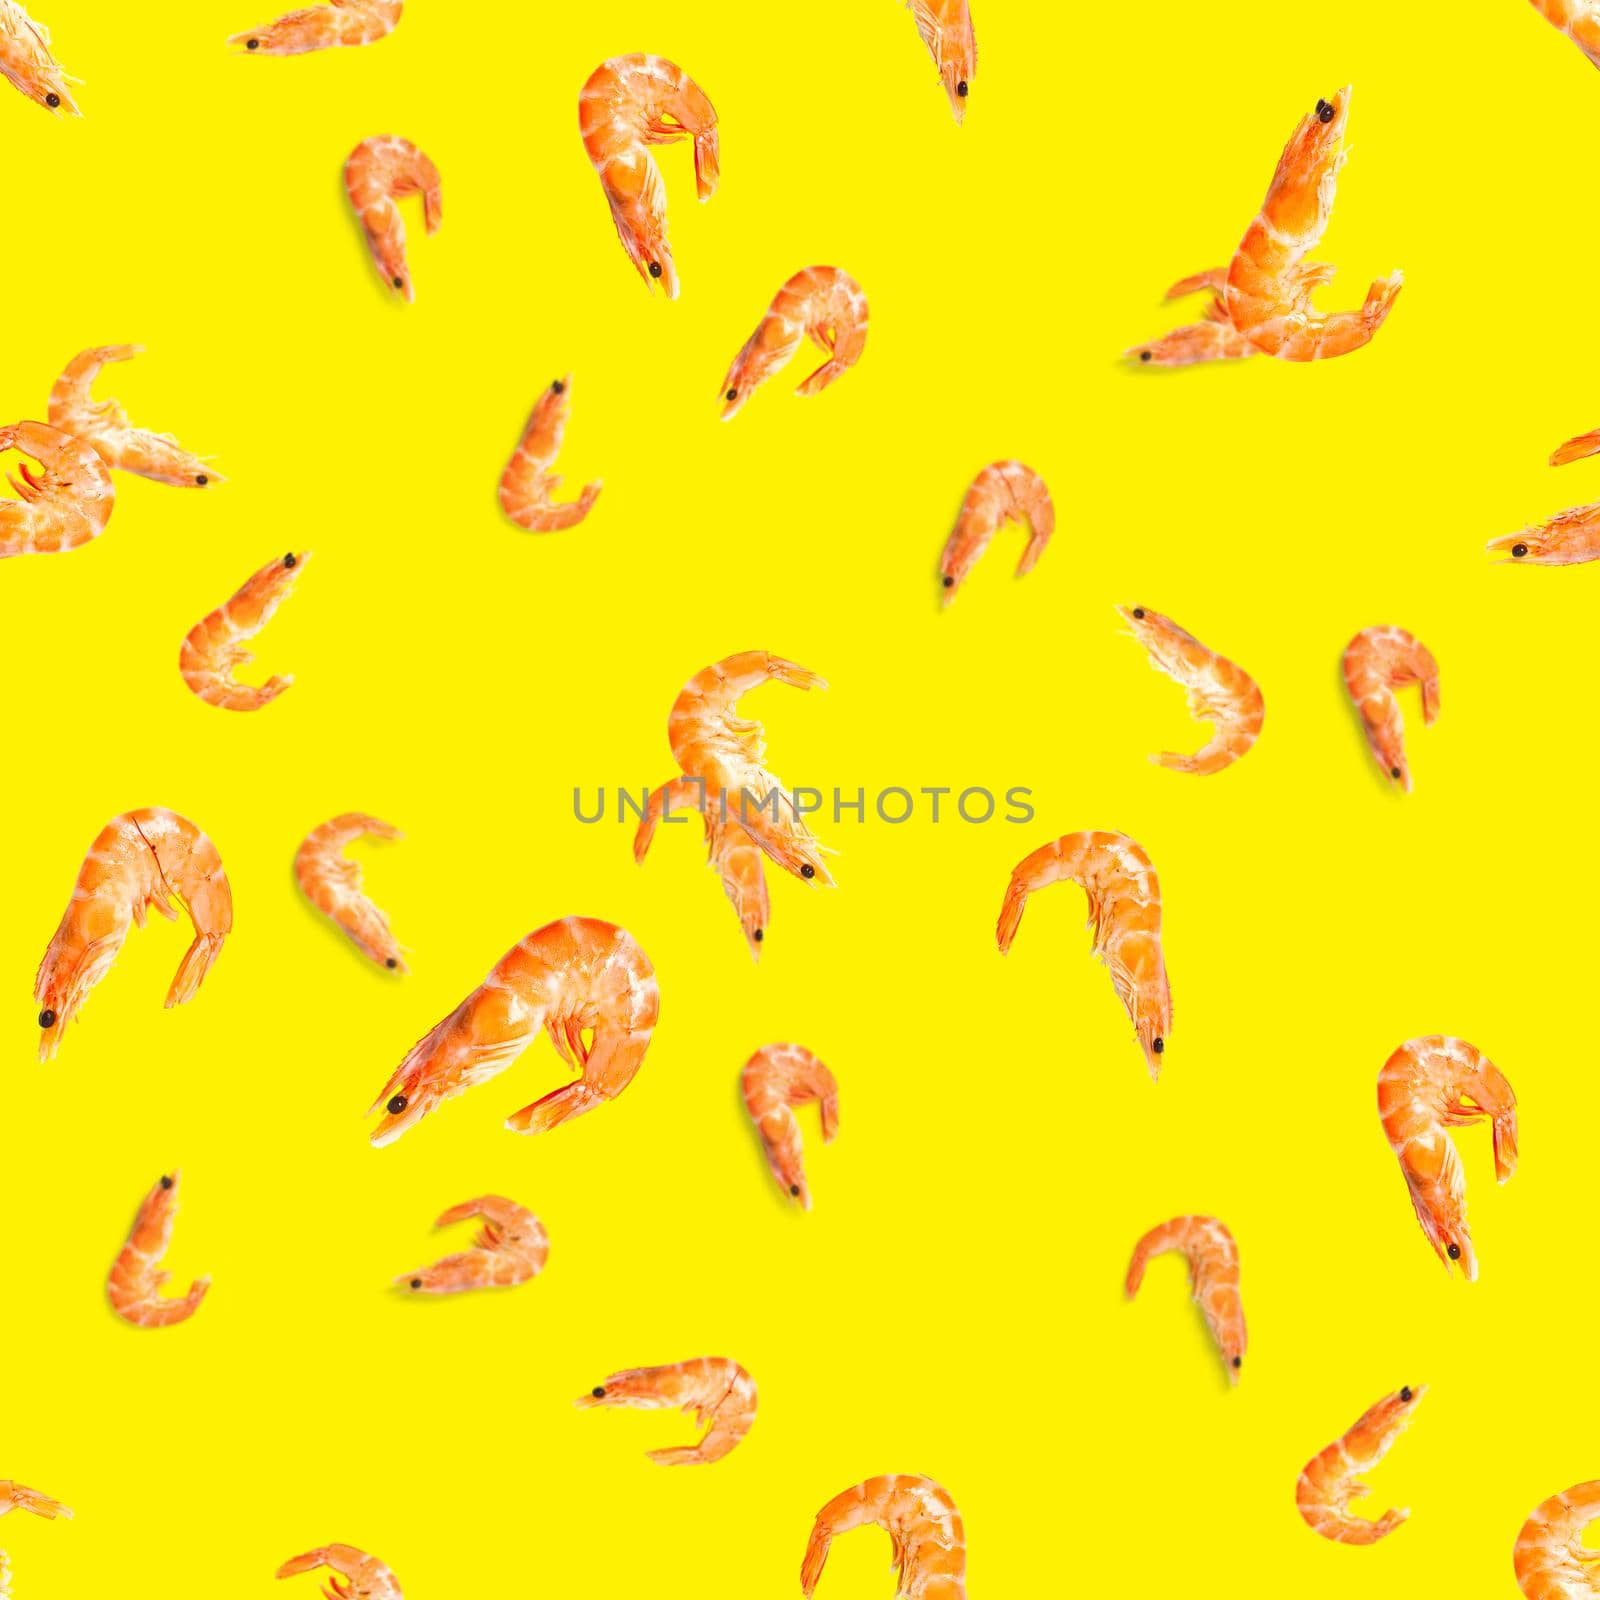 Tiger shrimp. Seamless pattern made from Prawn isolated on a yellow background. Seafood seamless pattern with shrimps. seafood pattern by PhotoTime